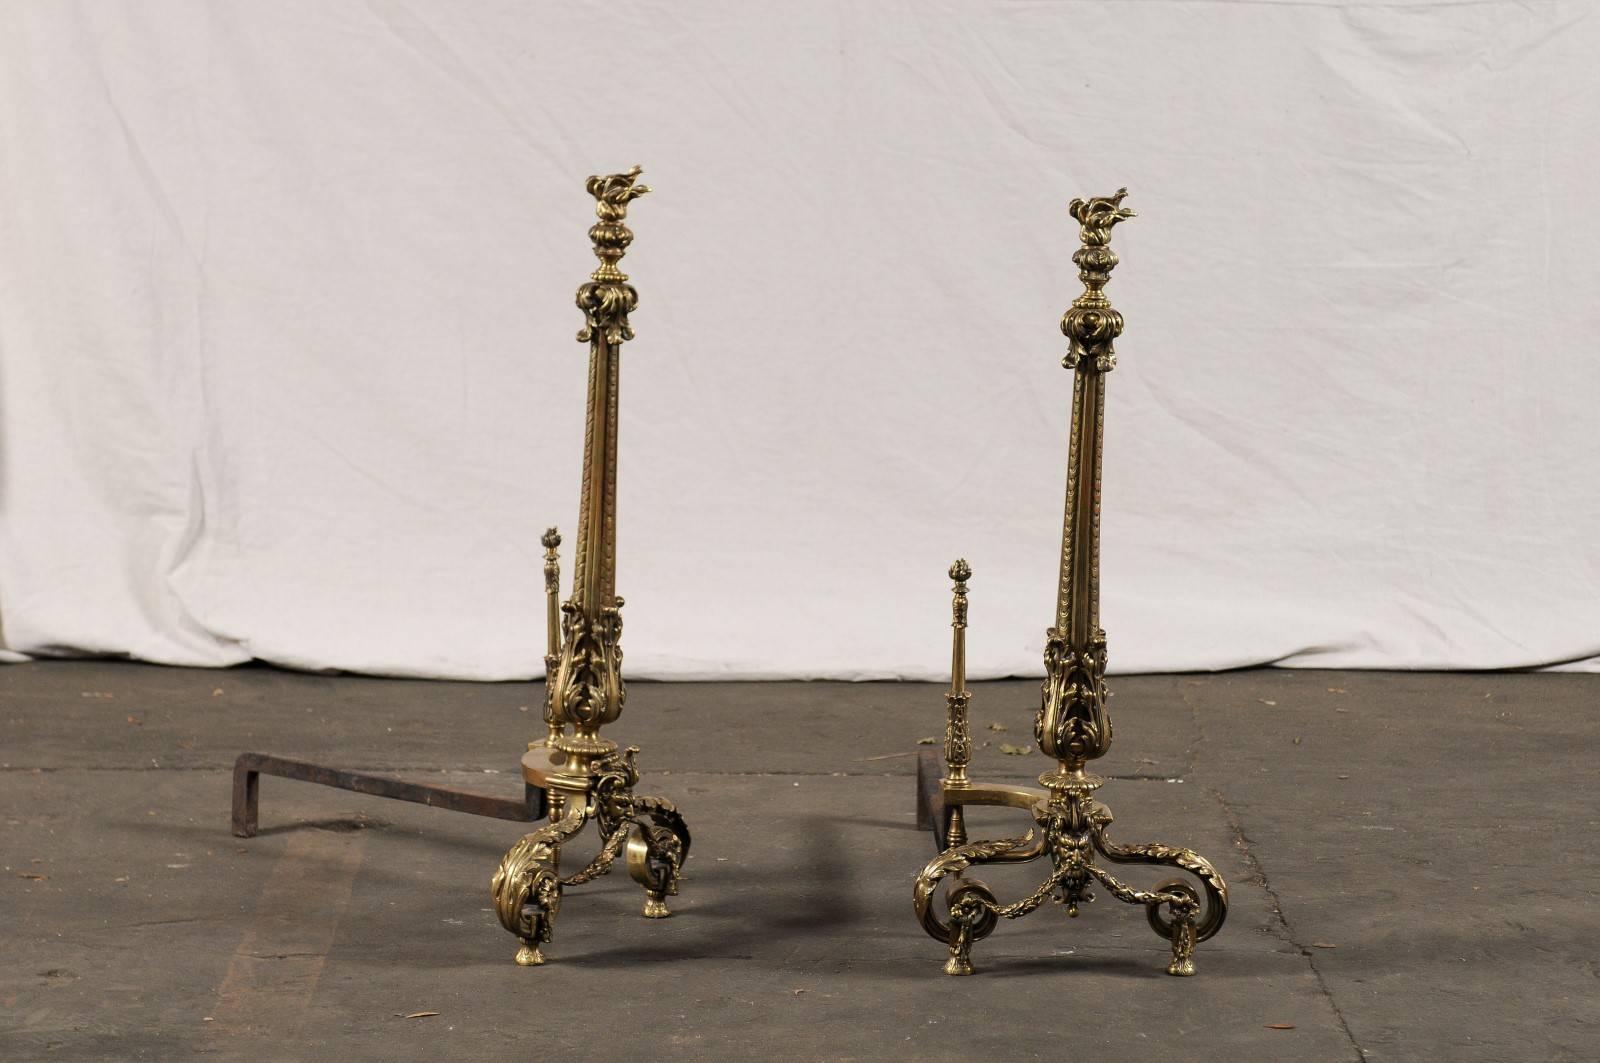 Stunning early 20th century bronze andirons with flame finials.